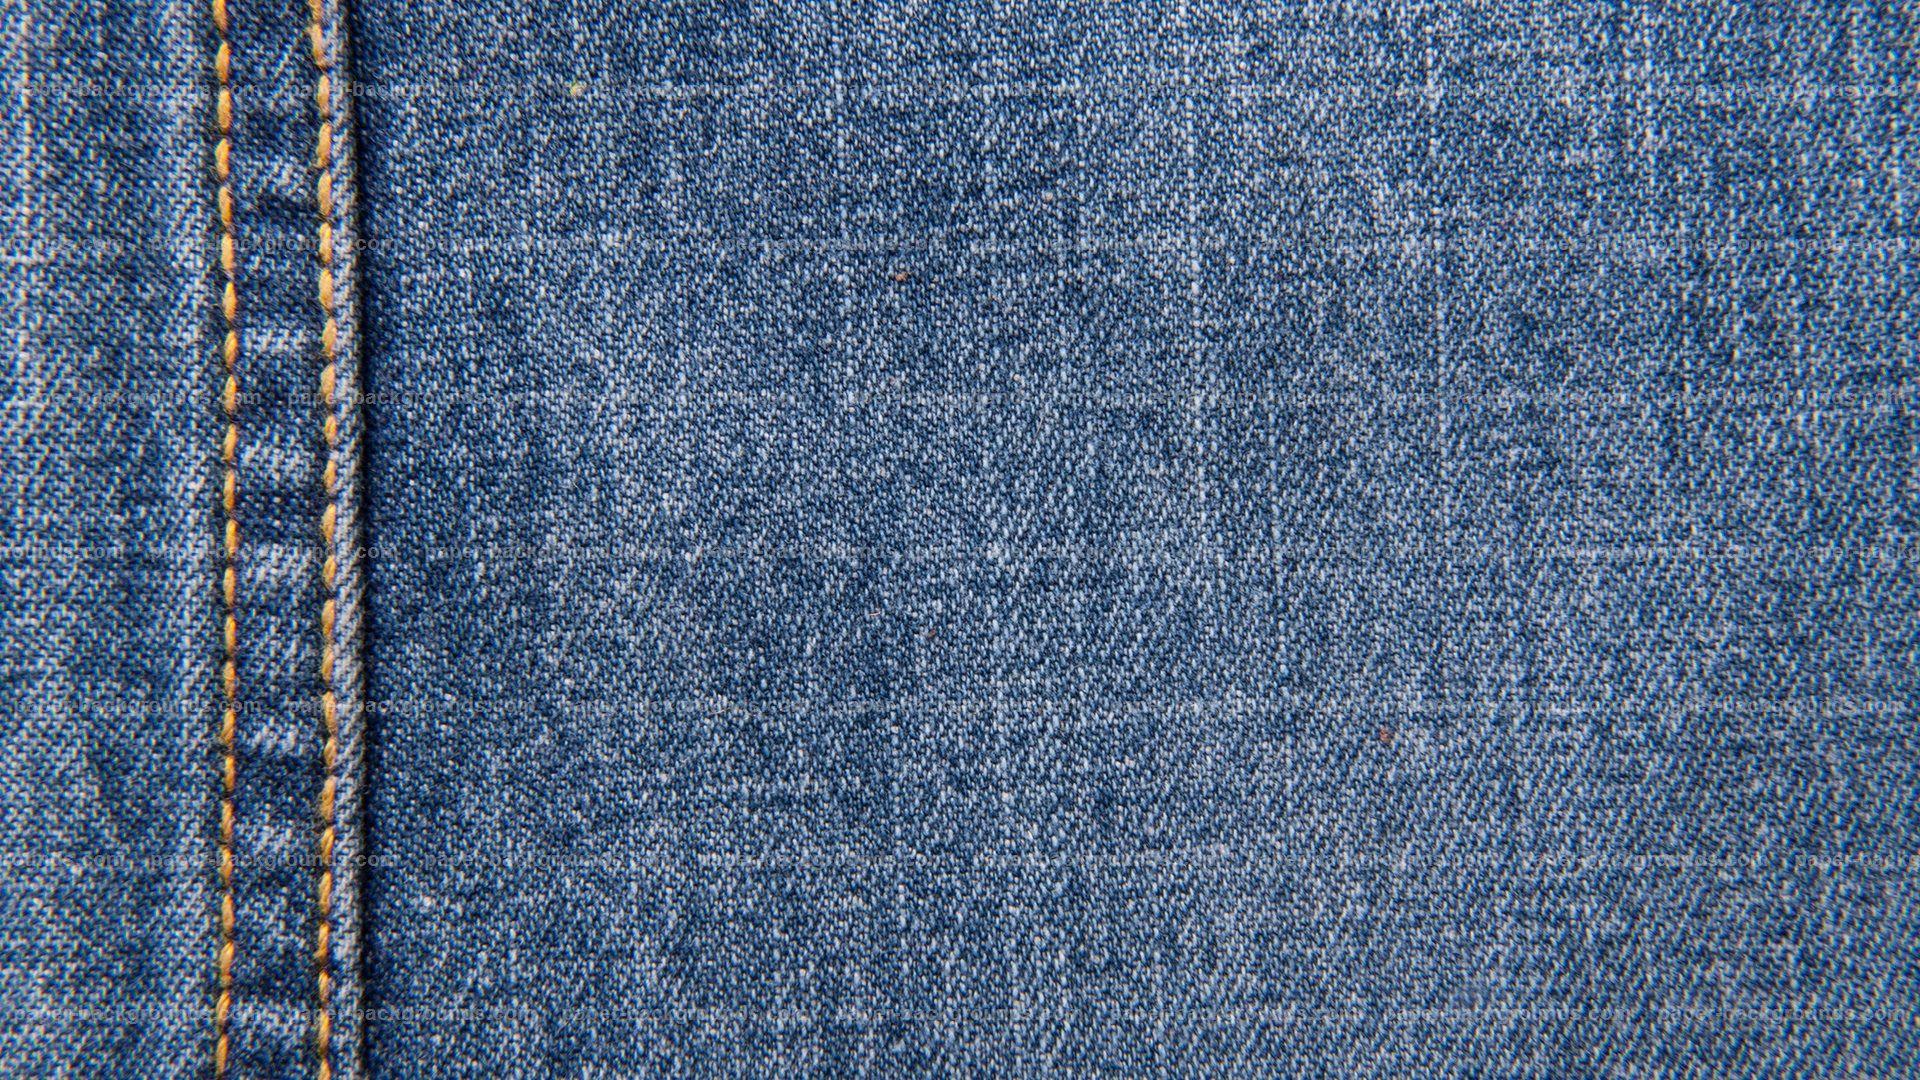 Jeans Wallpaper, 33 Jeans Image and Wallpaper for Mac, PC. D